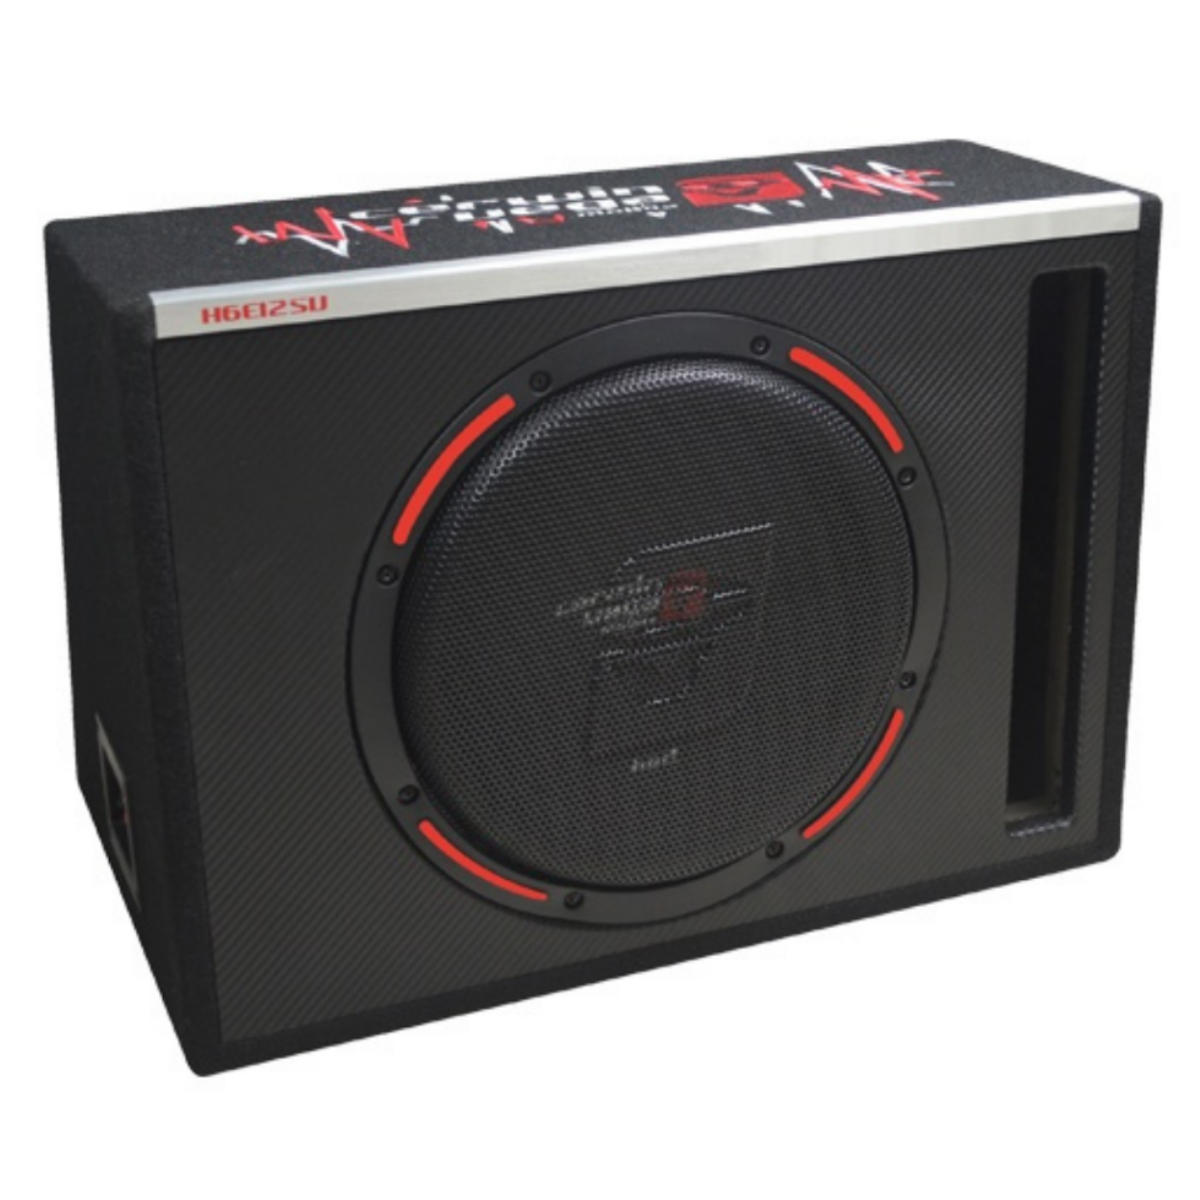 H6E12SV - Single 12" 1000W HED Series Subwoofer in Factory-Tuned Vented Enclosure